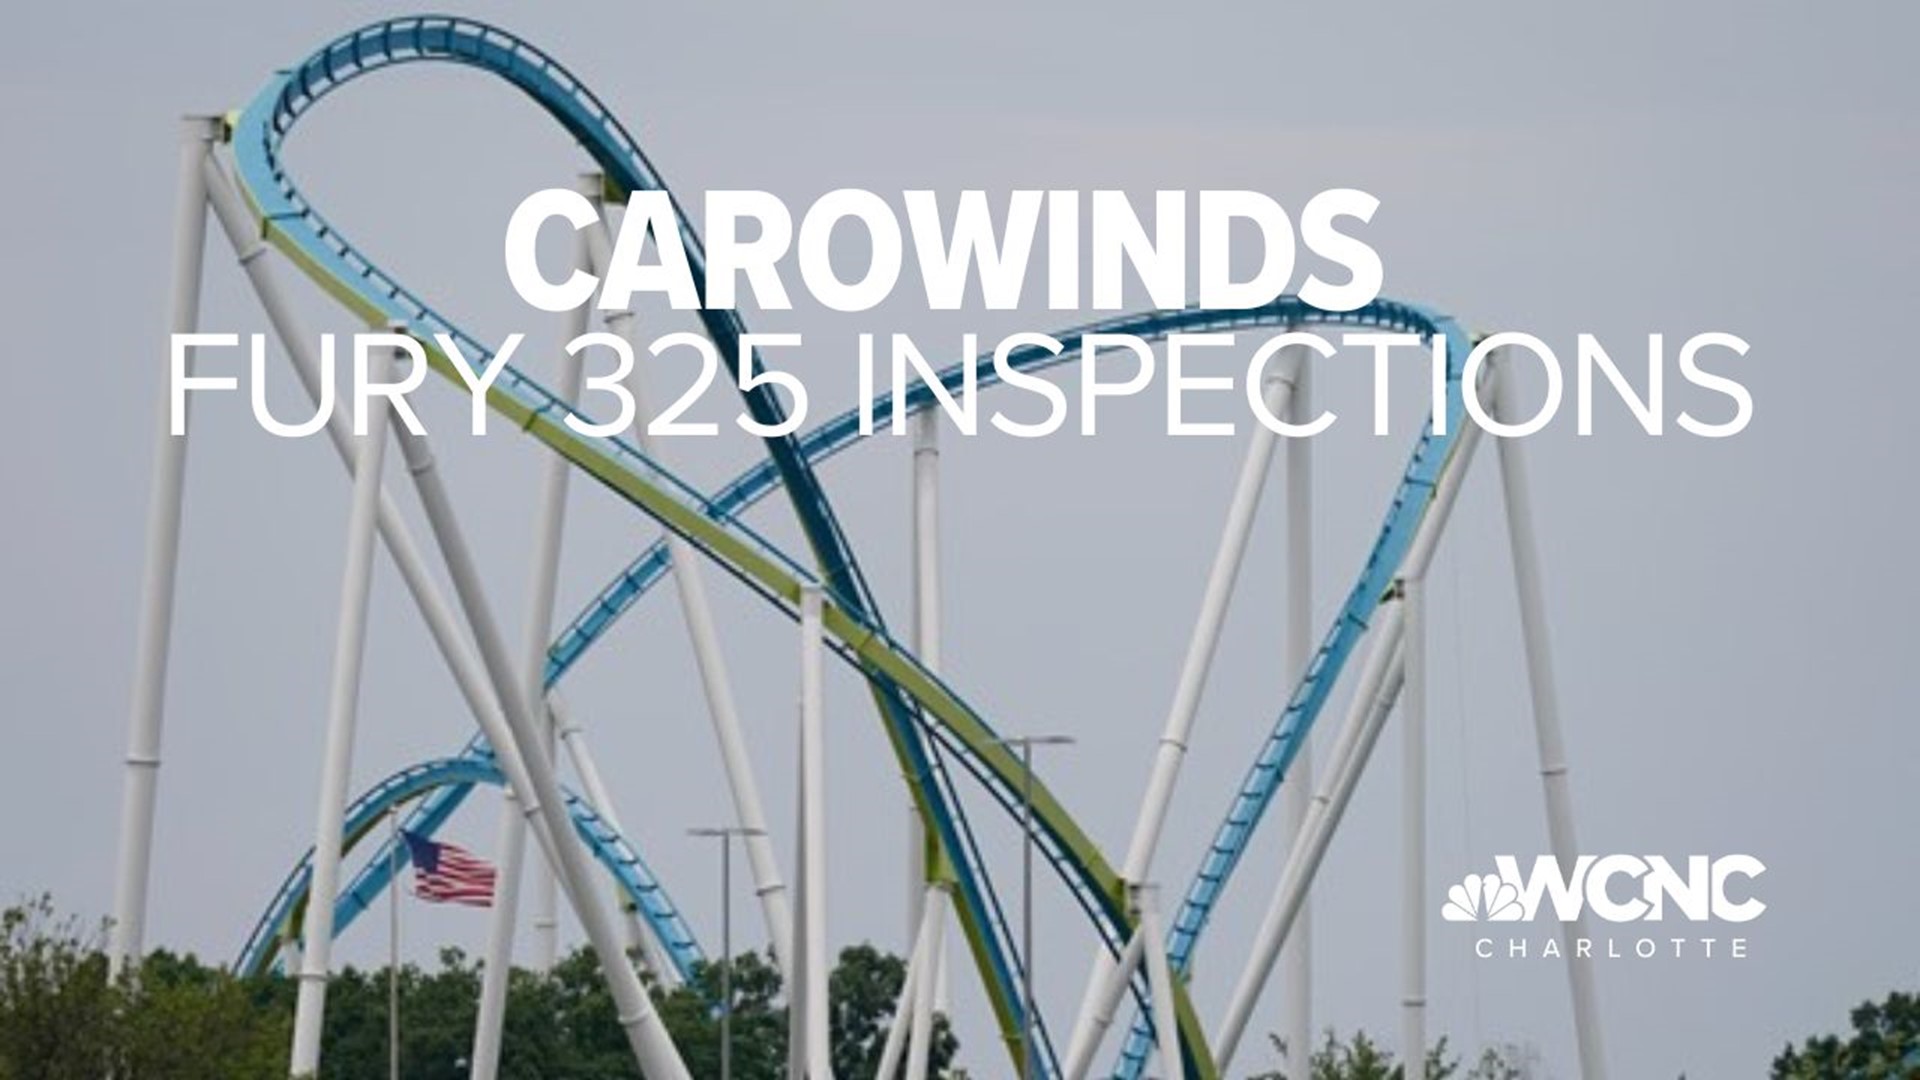 We're learning more about a second issue on the fury 325 roller coaster at Carowinds.